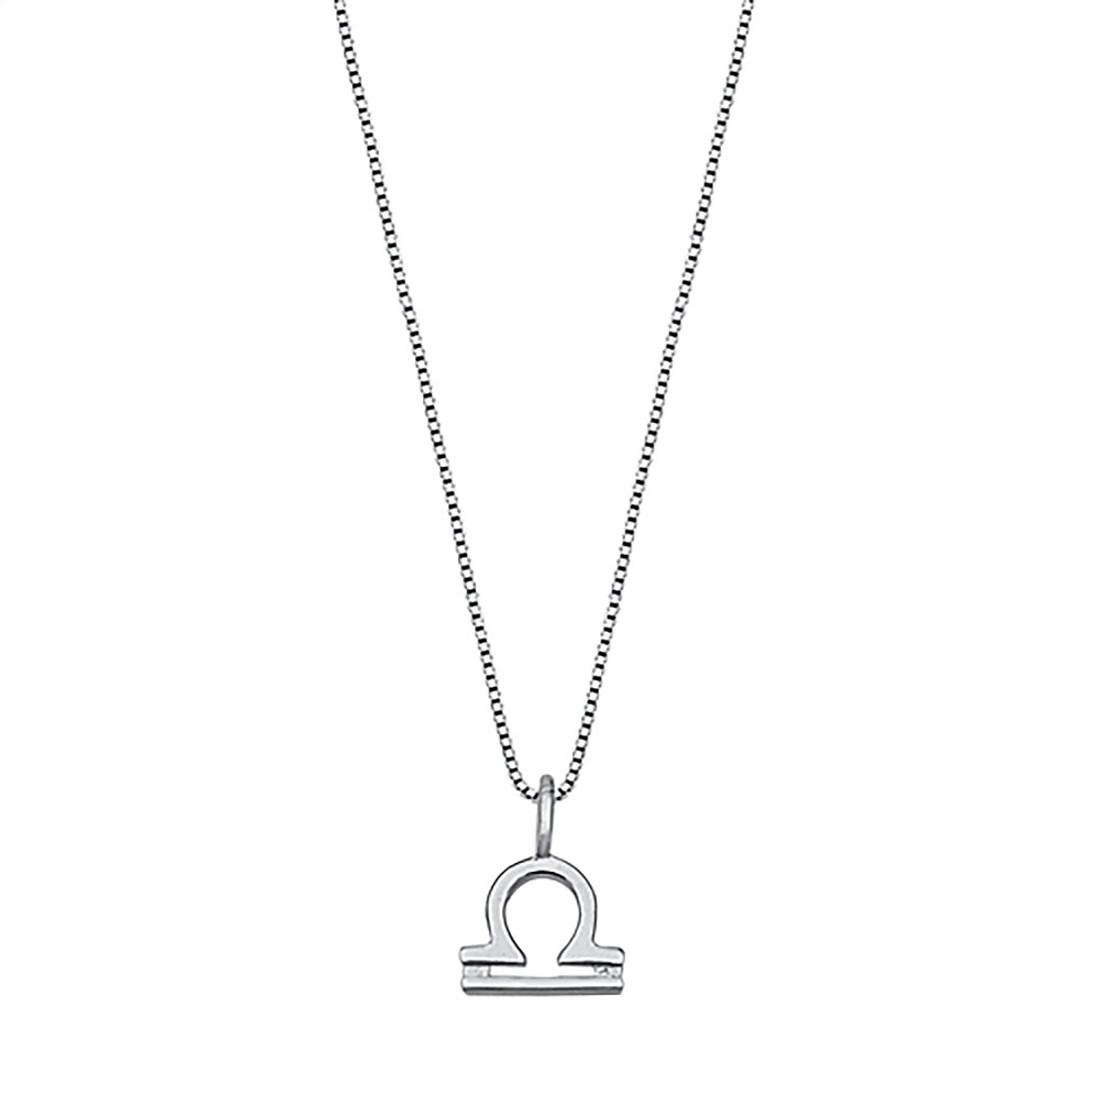 Sterling silver Libra pendant and chain necklace. 